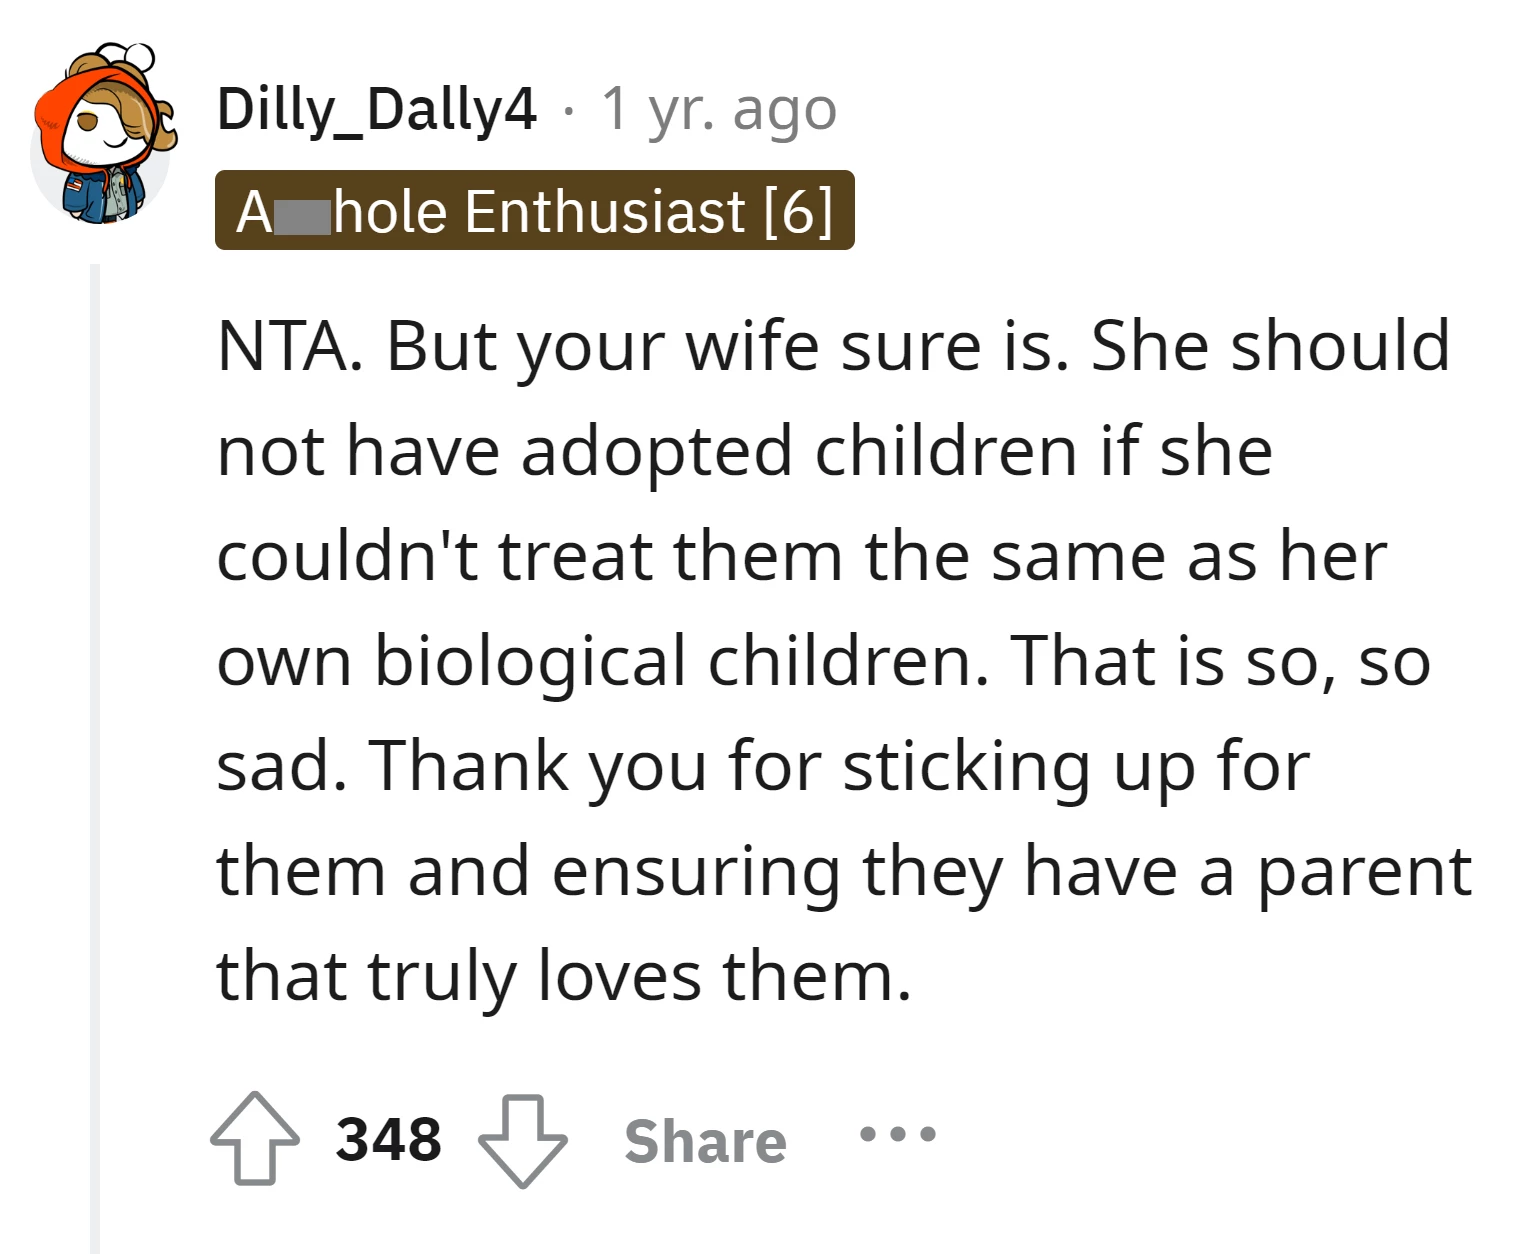 the wife for adopting children if she can't treat them equally